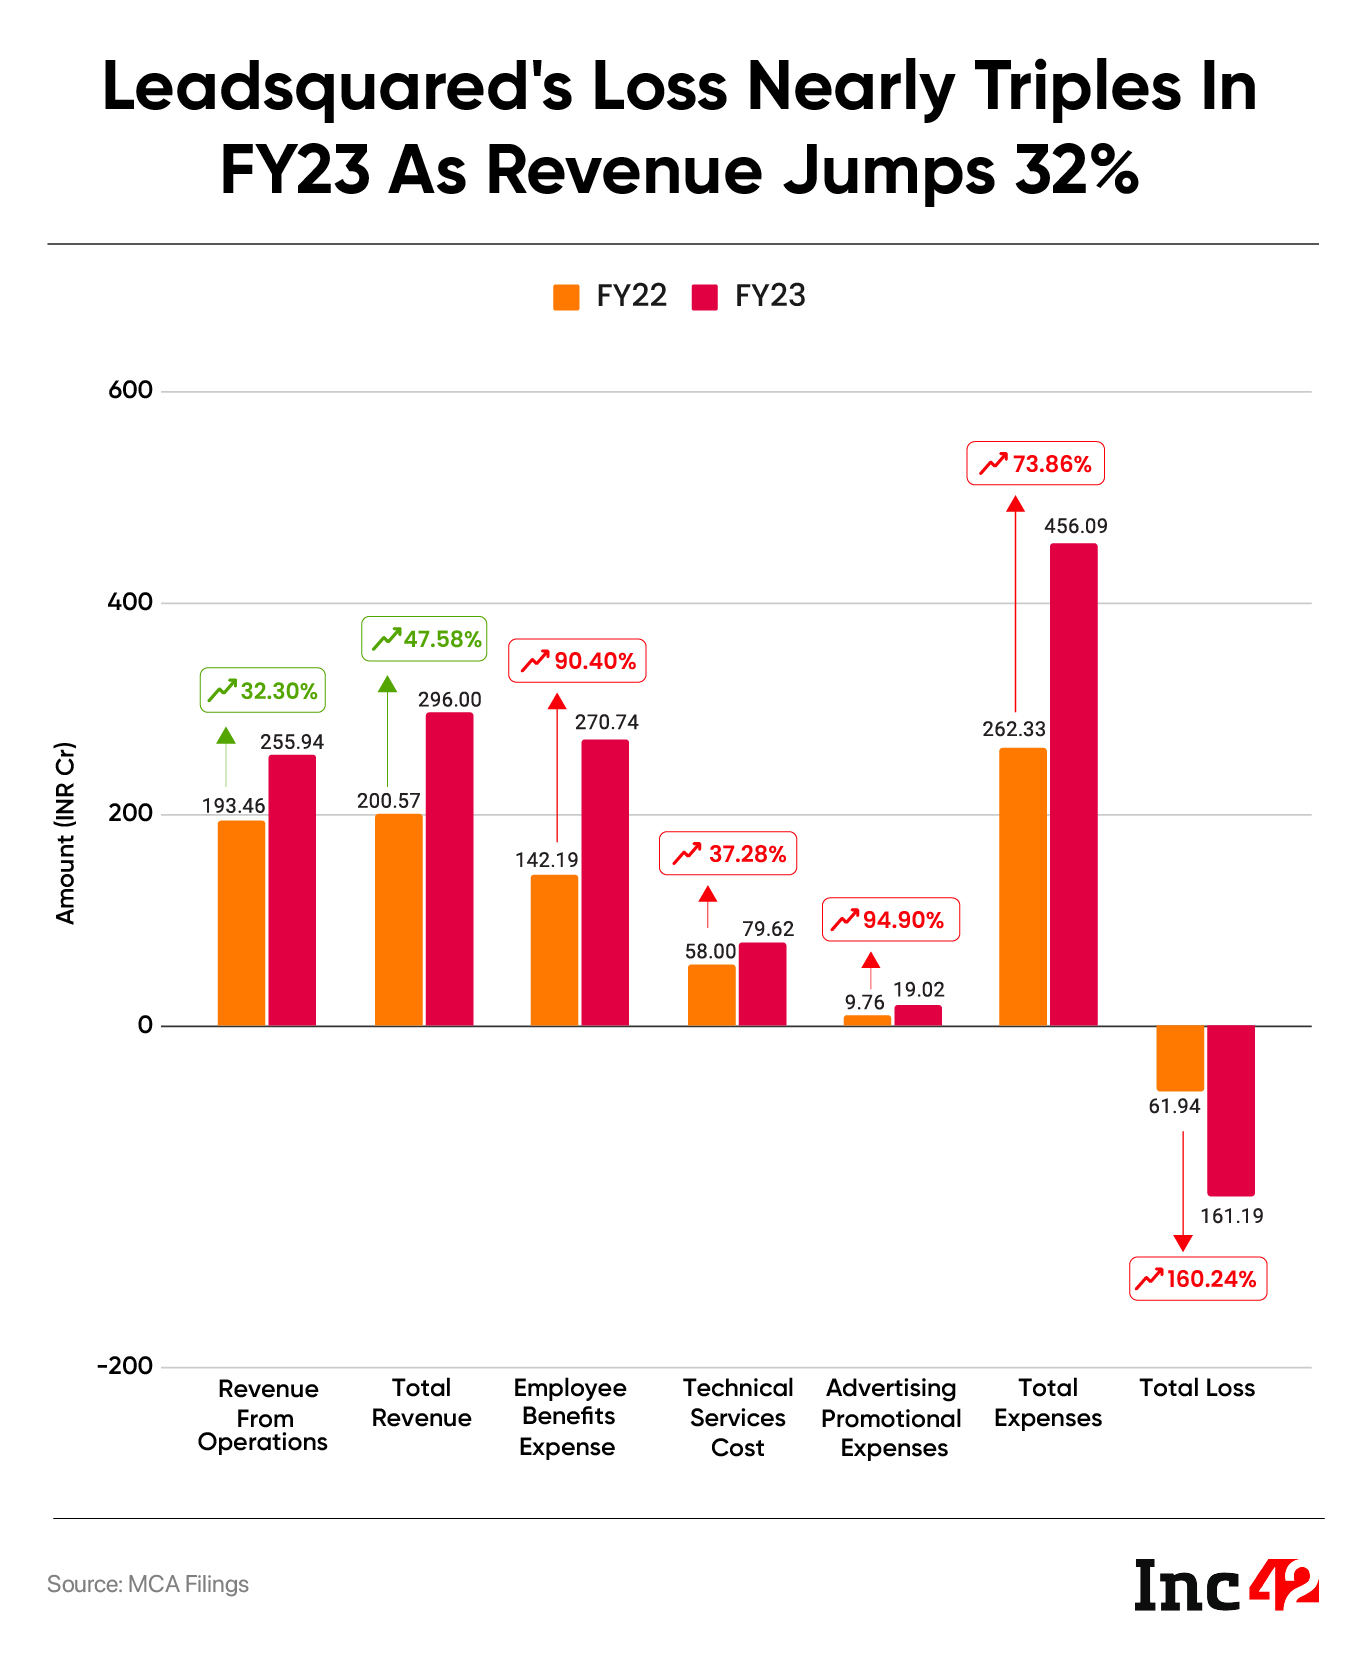 Leadsquared’s FY23 Loss Jumps 2.6X To INR 161 Cr As Expenses Skyrocket